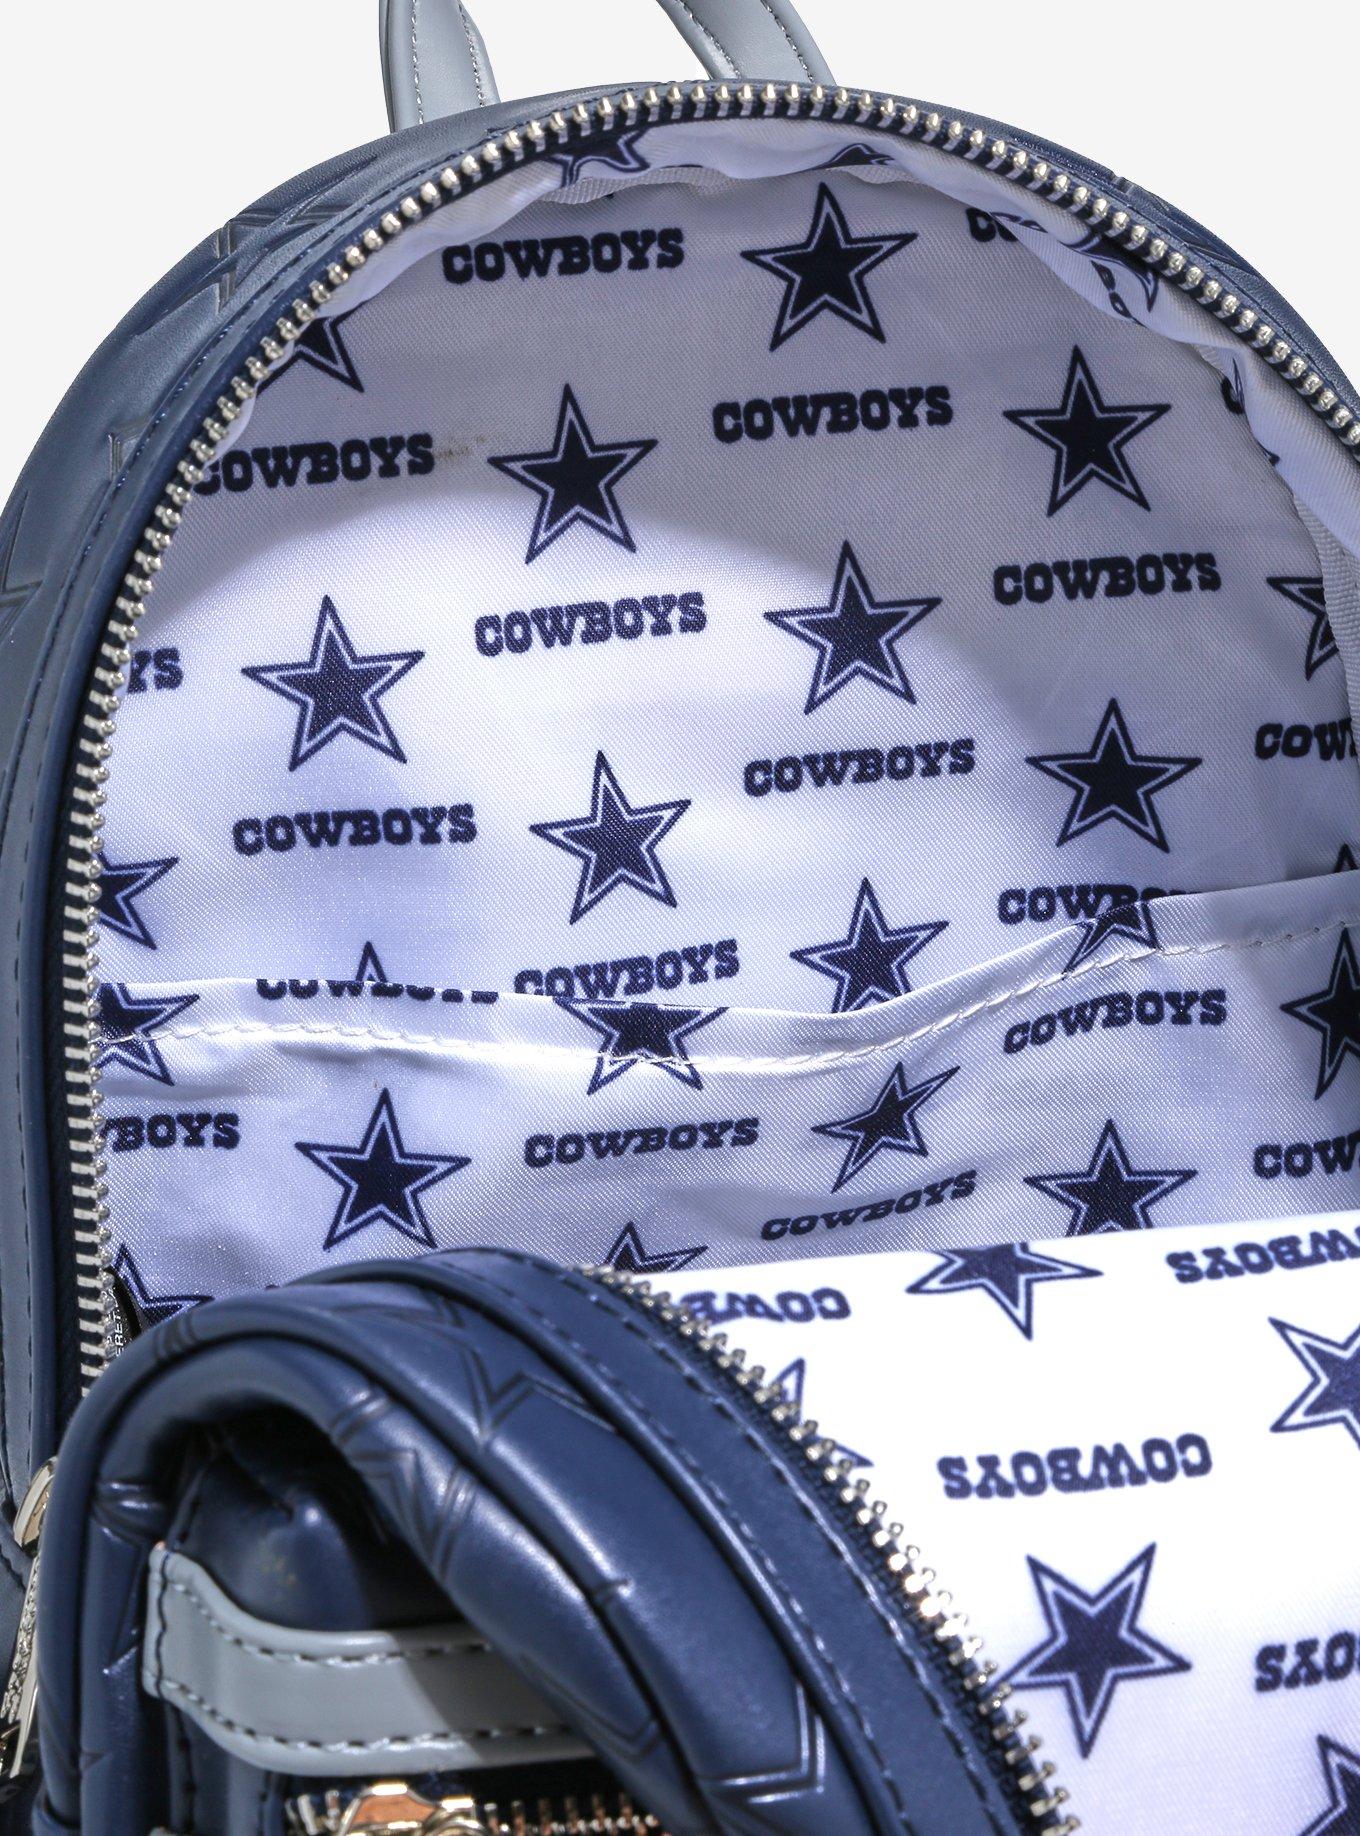 Loungefly NFL Dallas Cowboys Patches Mini Backpack — Pop Hunt Thrills